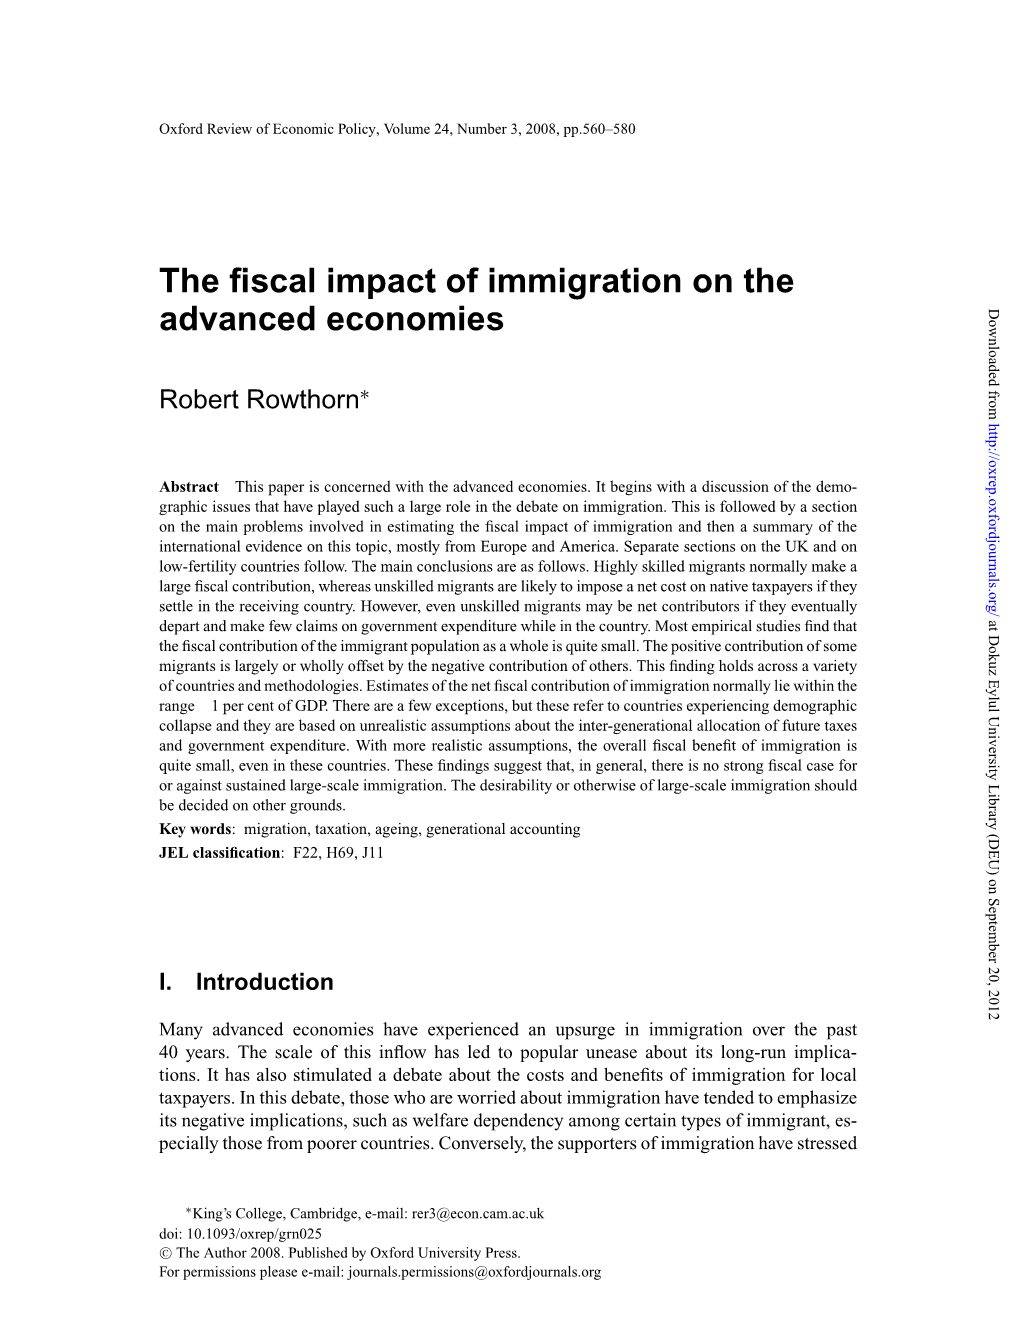 The Fiscal Impact of Immigration on the Advanced Economies